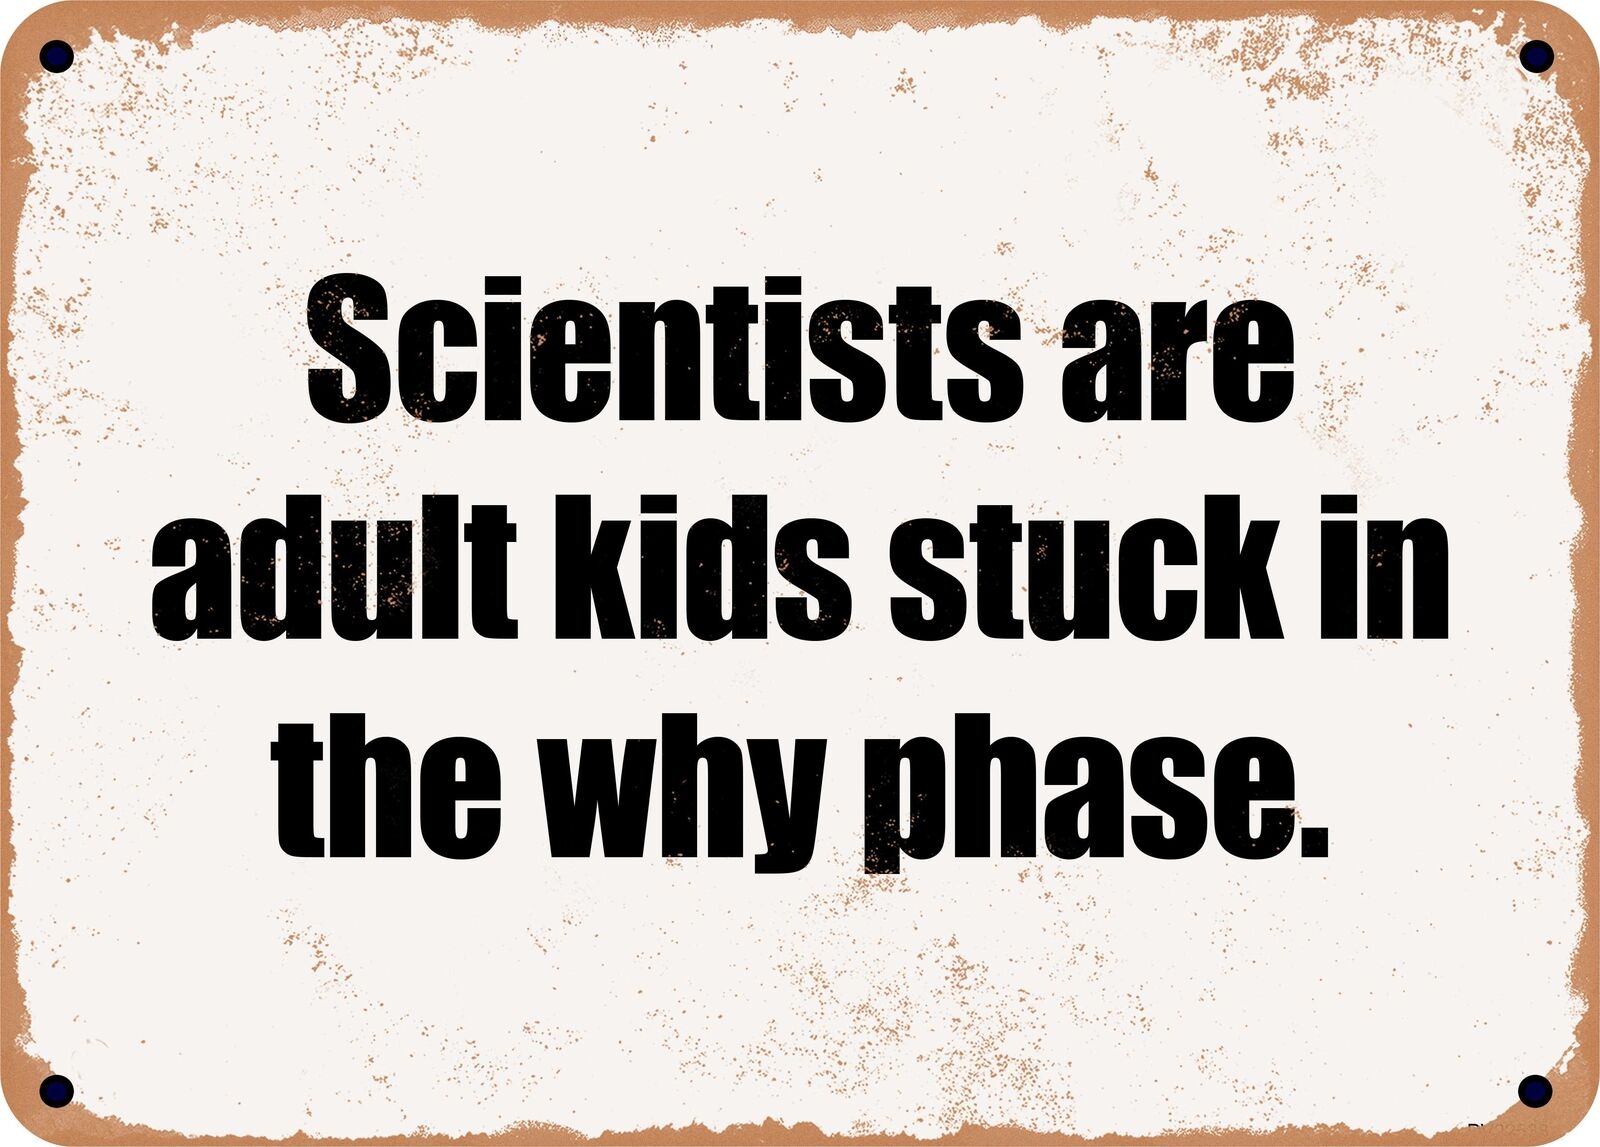 METAL SIGN - Scientists are adult kids stuck in the why phase.